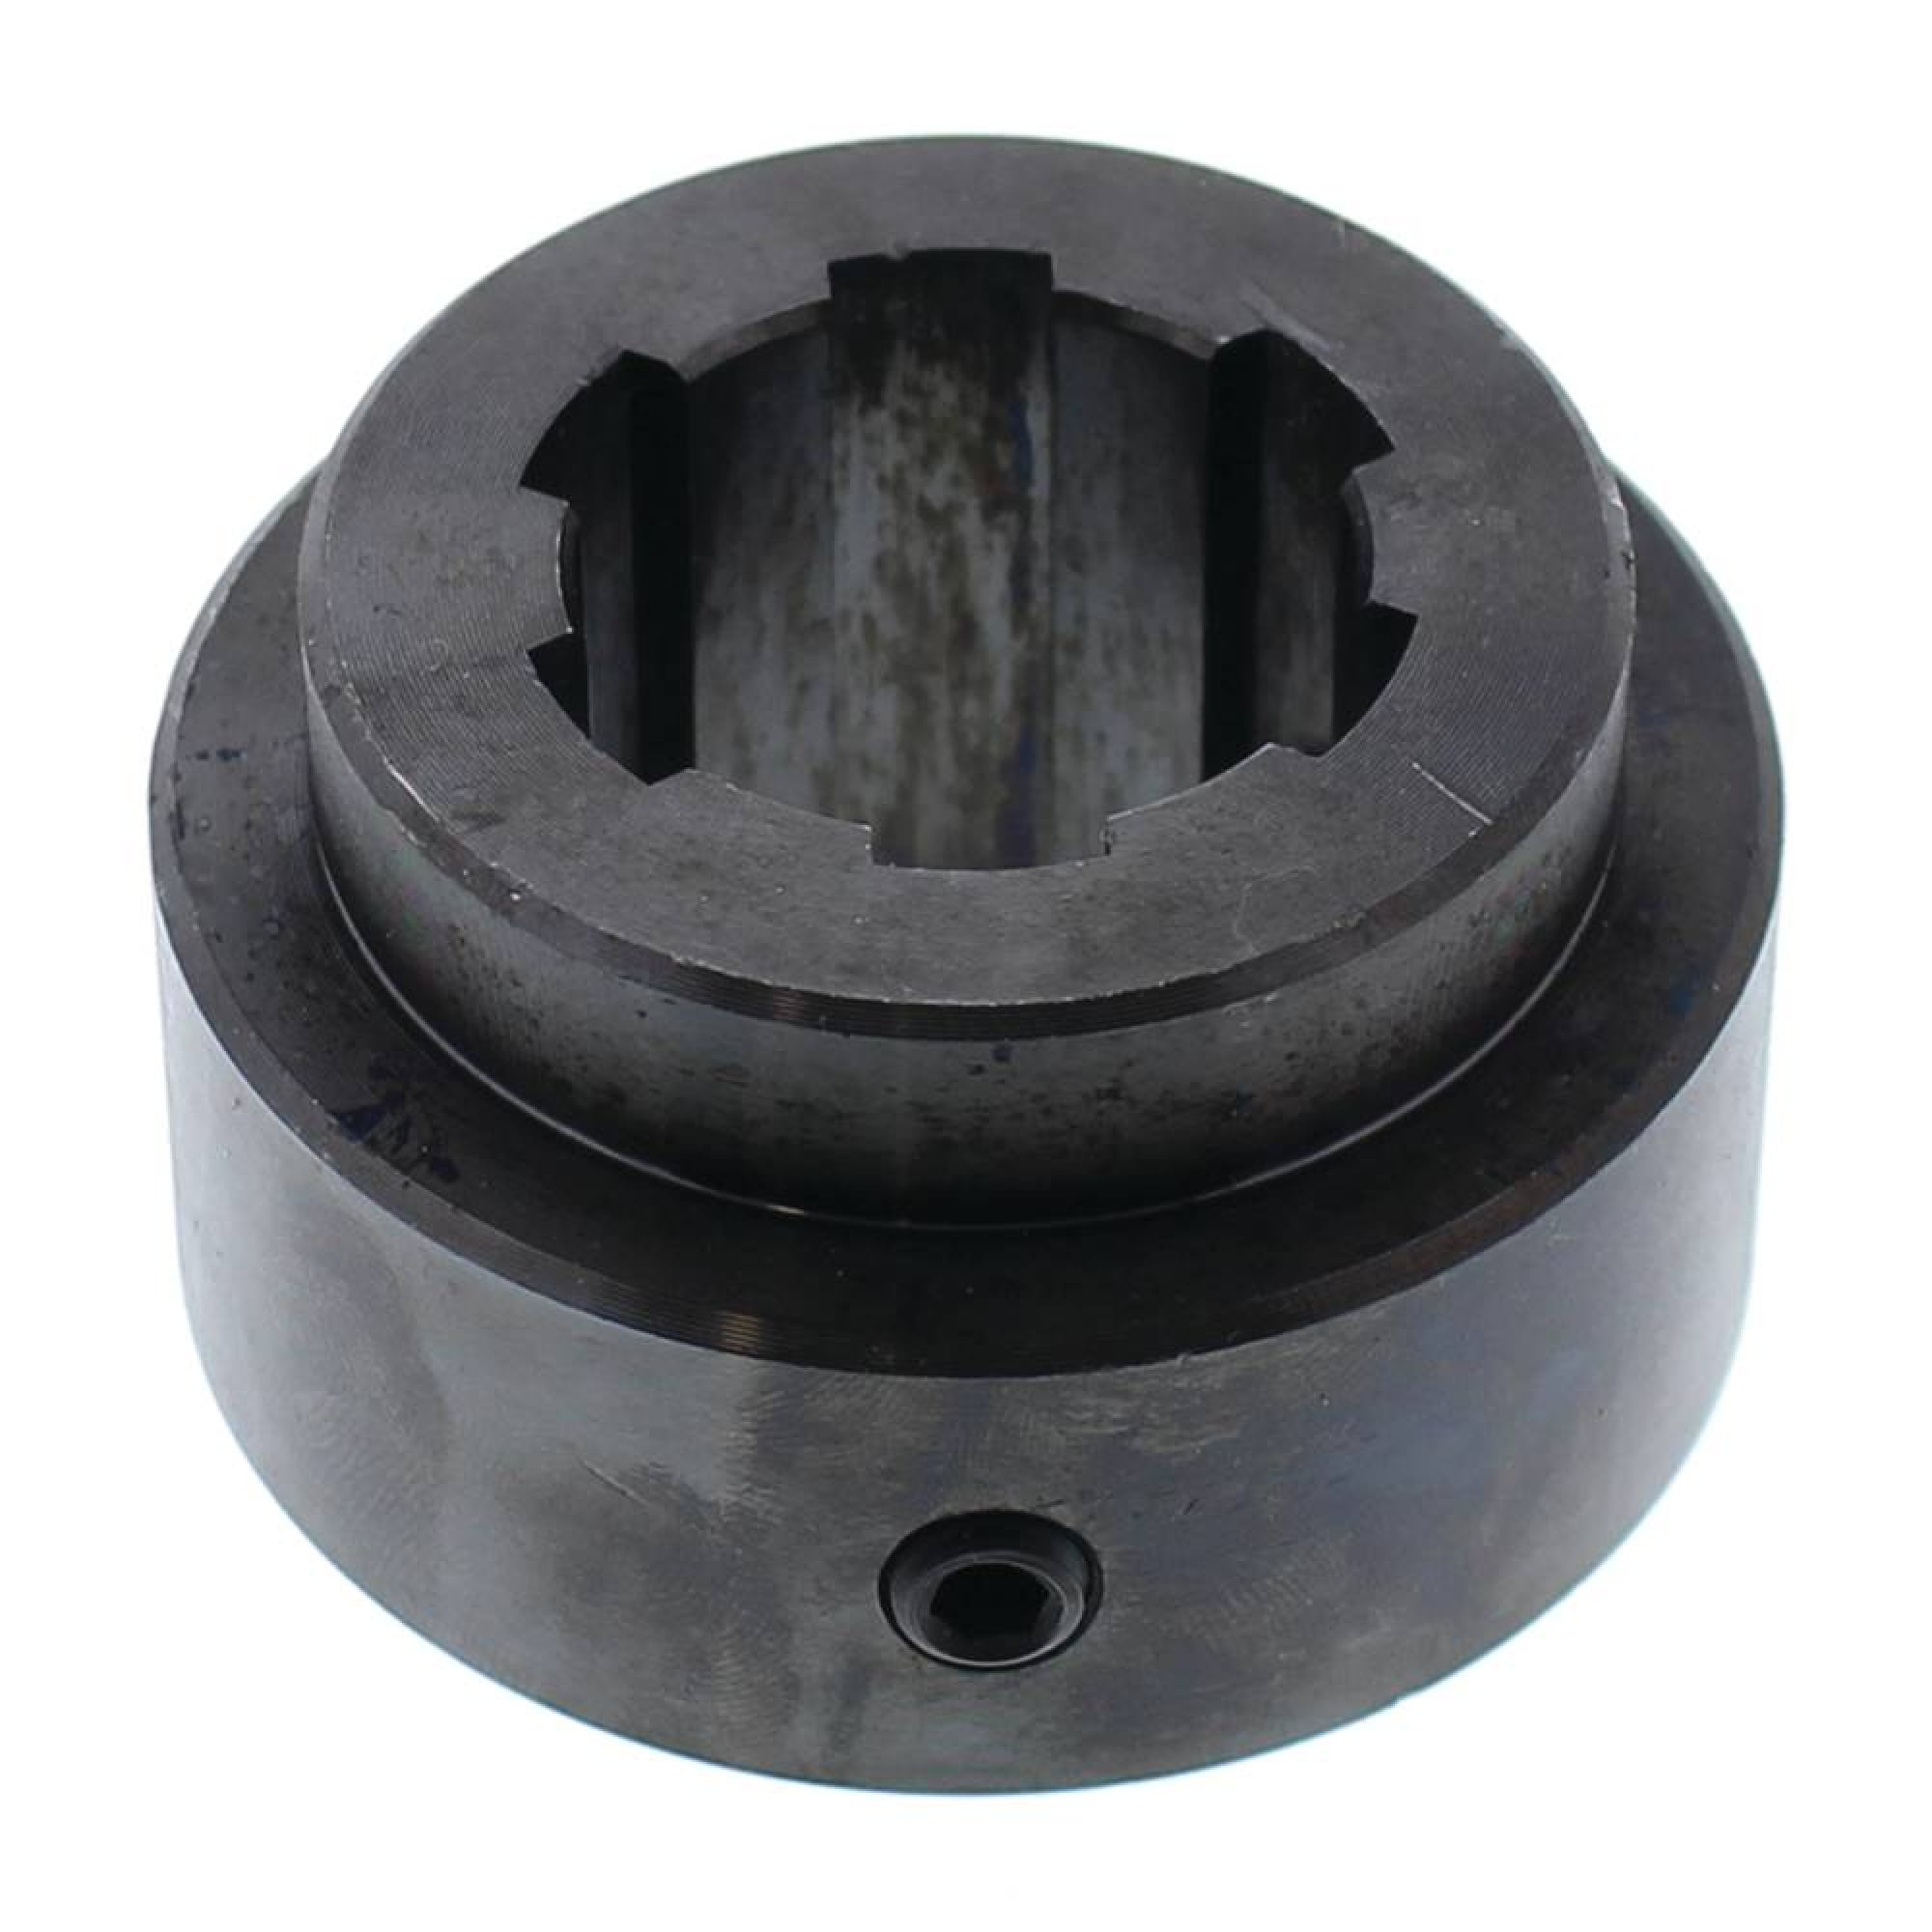 New Complete Tractor Hub Compatible With/Replacement For Universal Products WSH32206 3016-0137